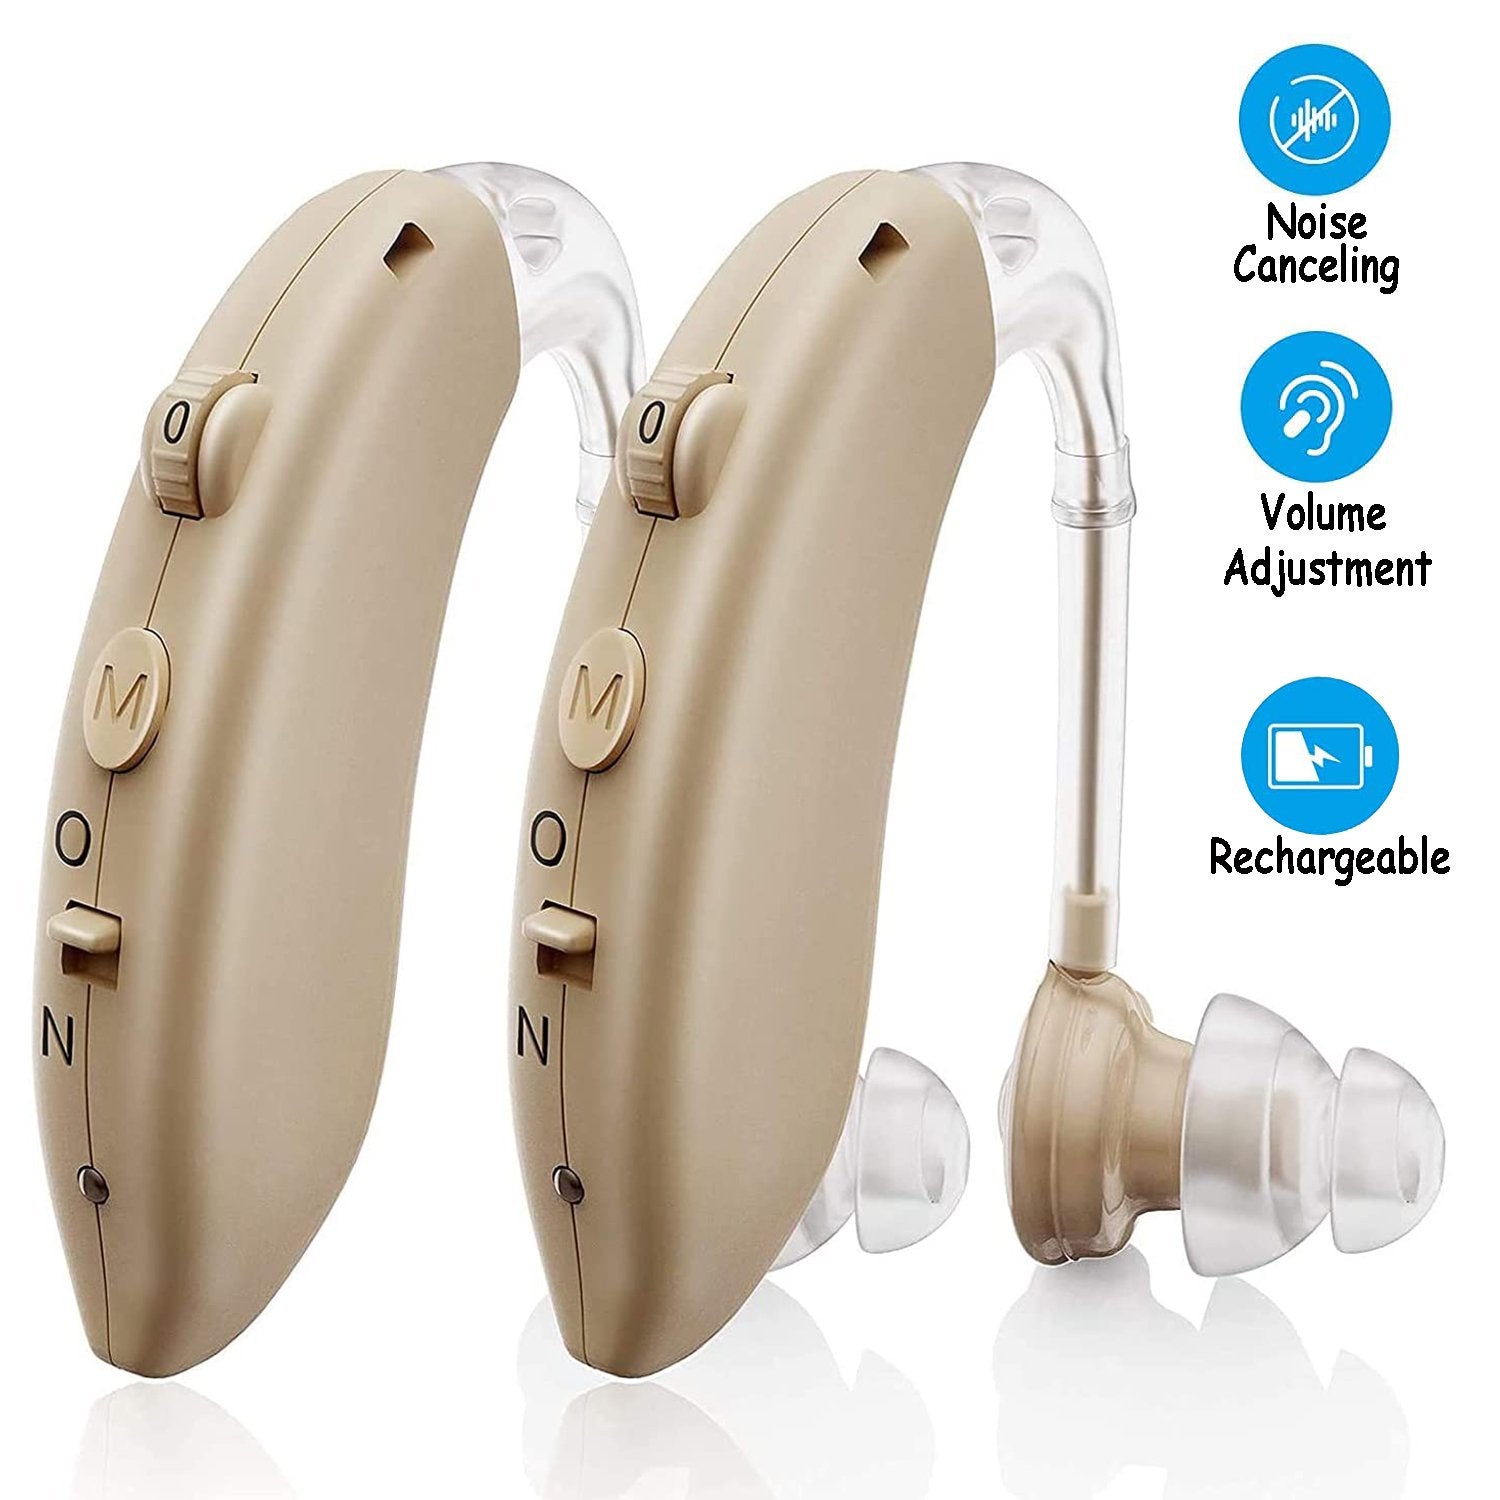 Hearing Aids, Digital Hearing Ears Amplifiers for Ears Seen On TV, BTE In-Ear Assist Devices for Seniors, Rechargeable Earing Aids with Ears Noise Consuling for Adults Hearing Loss, 2PCS